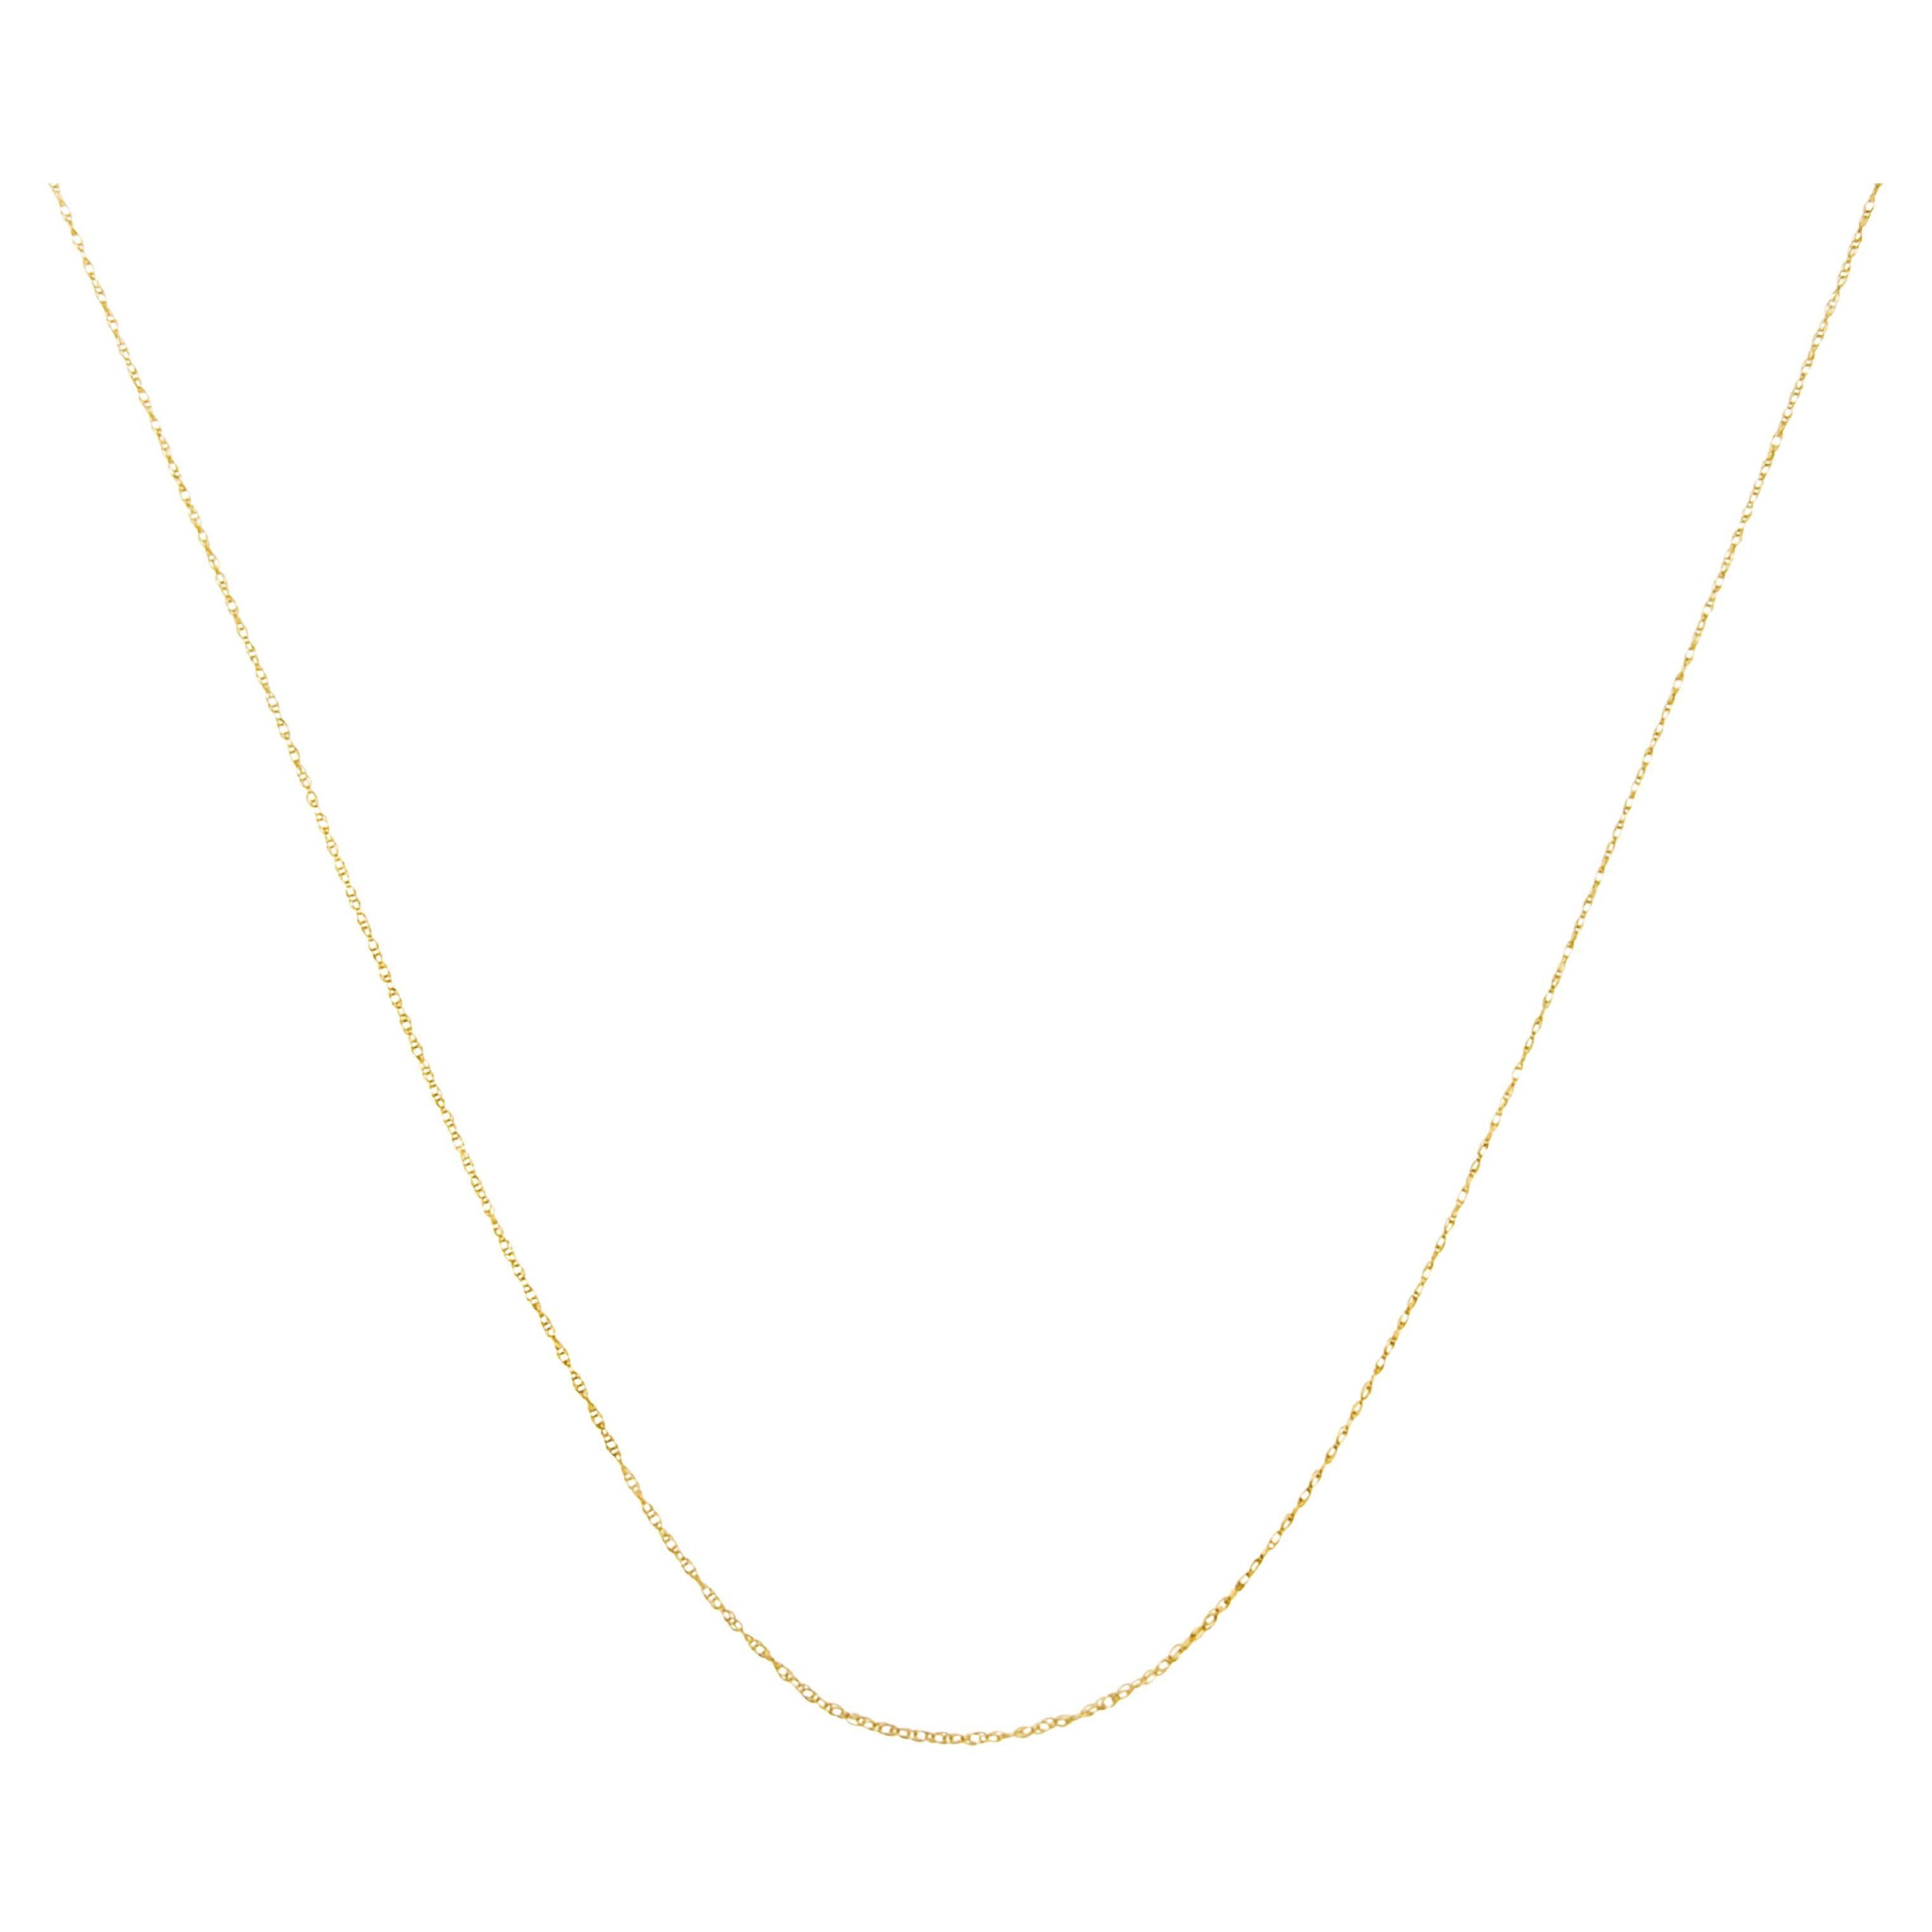 Solid 10K Yellow Gold Slim and Dainty Unisex Rope Chain Necklace